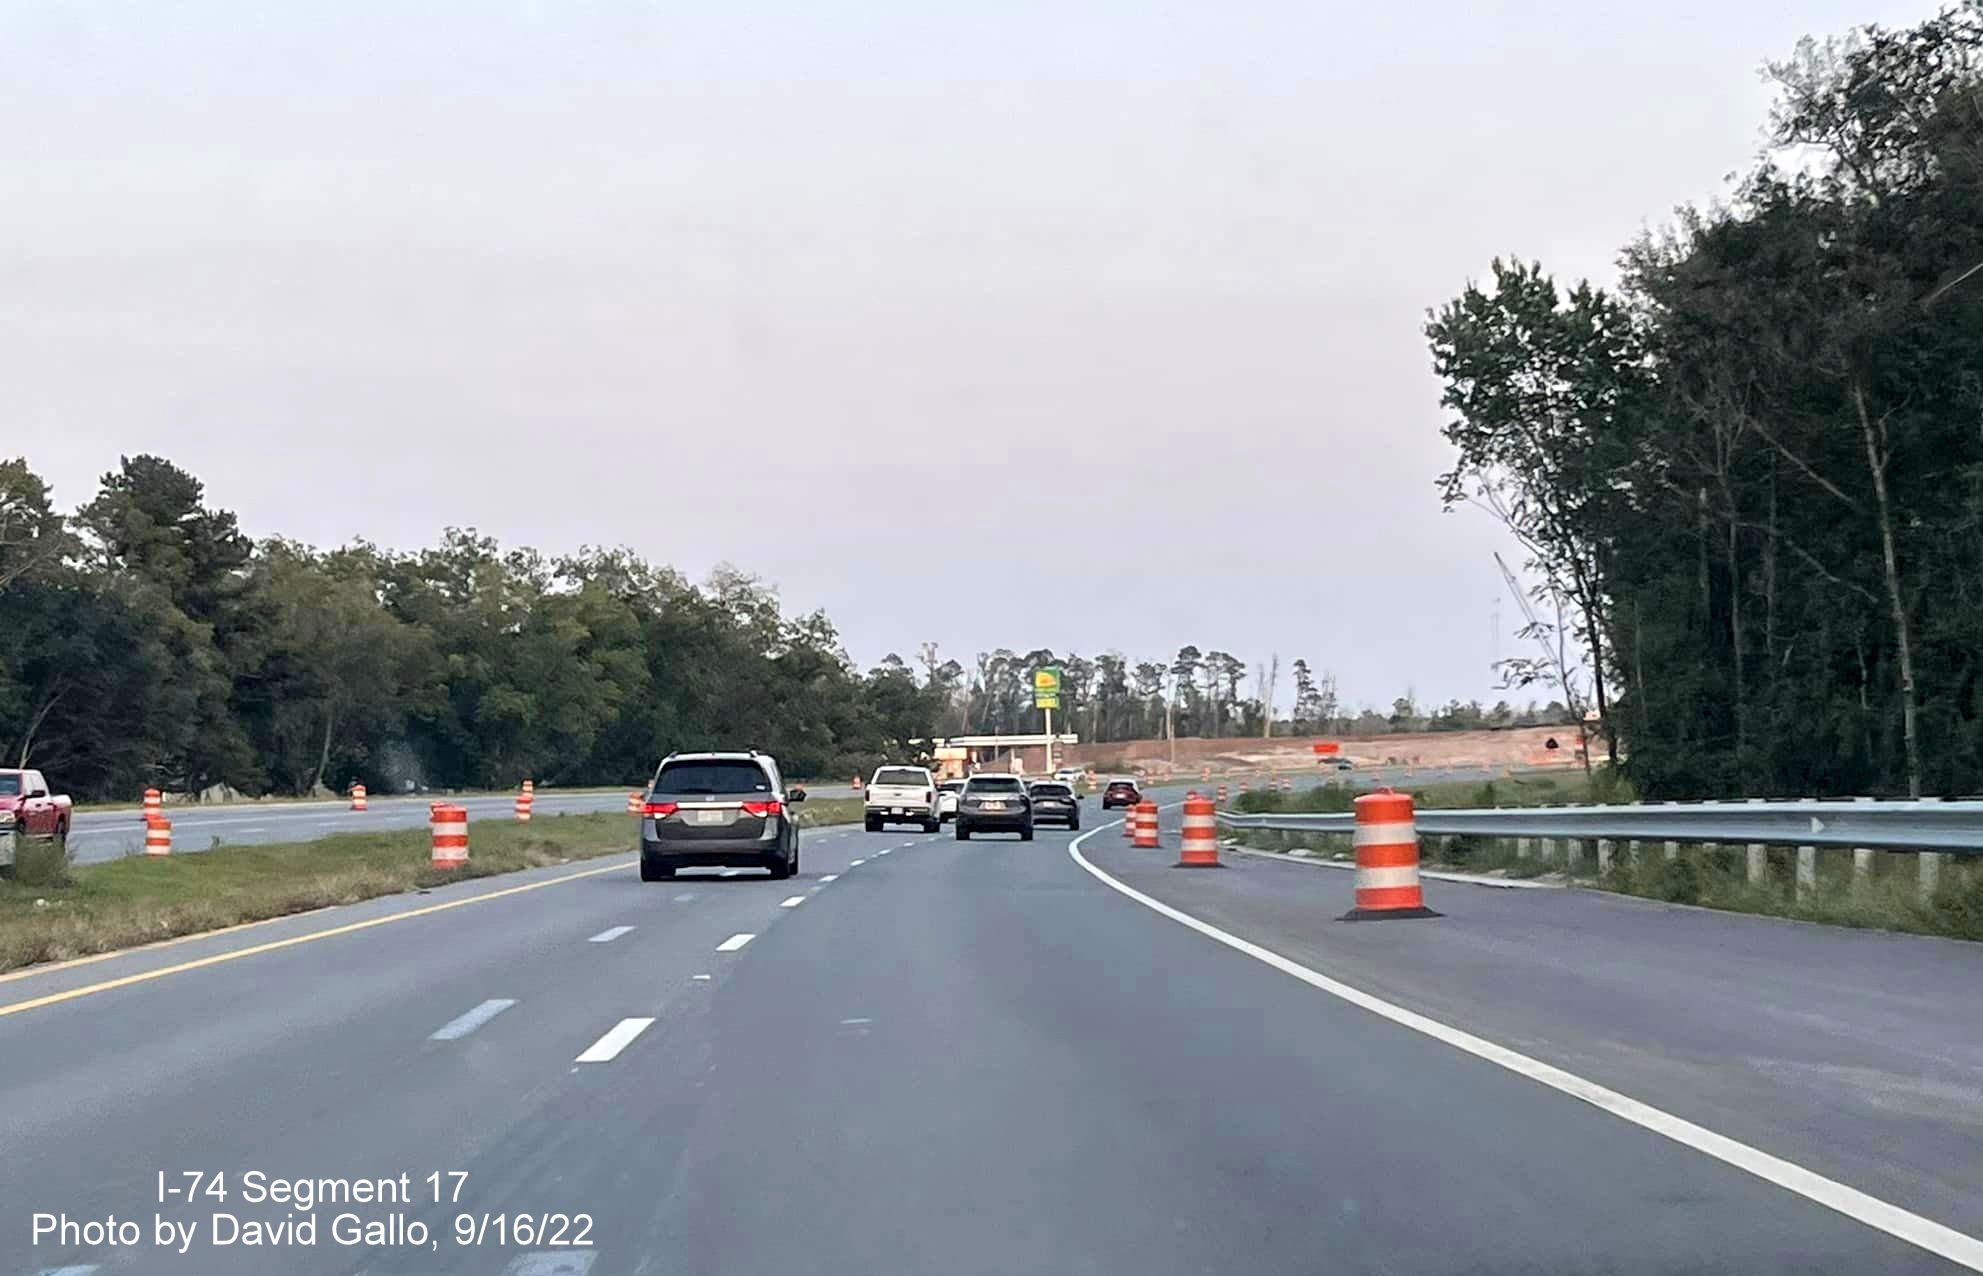 Image of US 74 East approaching Boardman interchange construction zone, by David Gallo September 2022